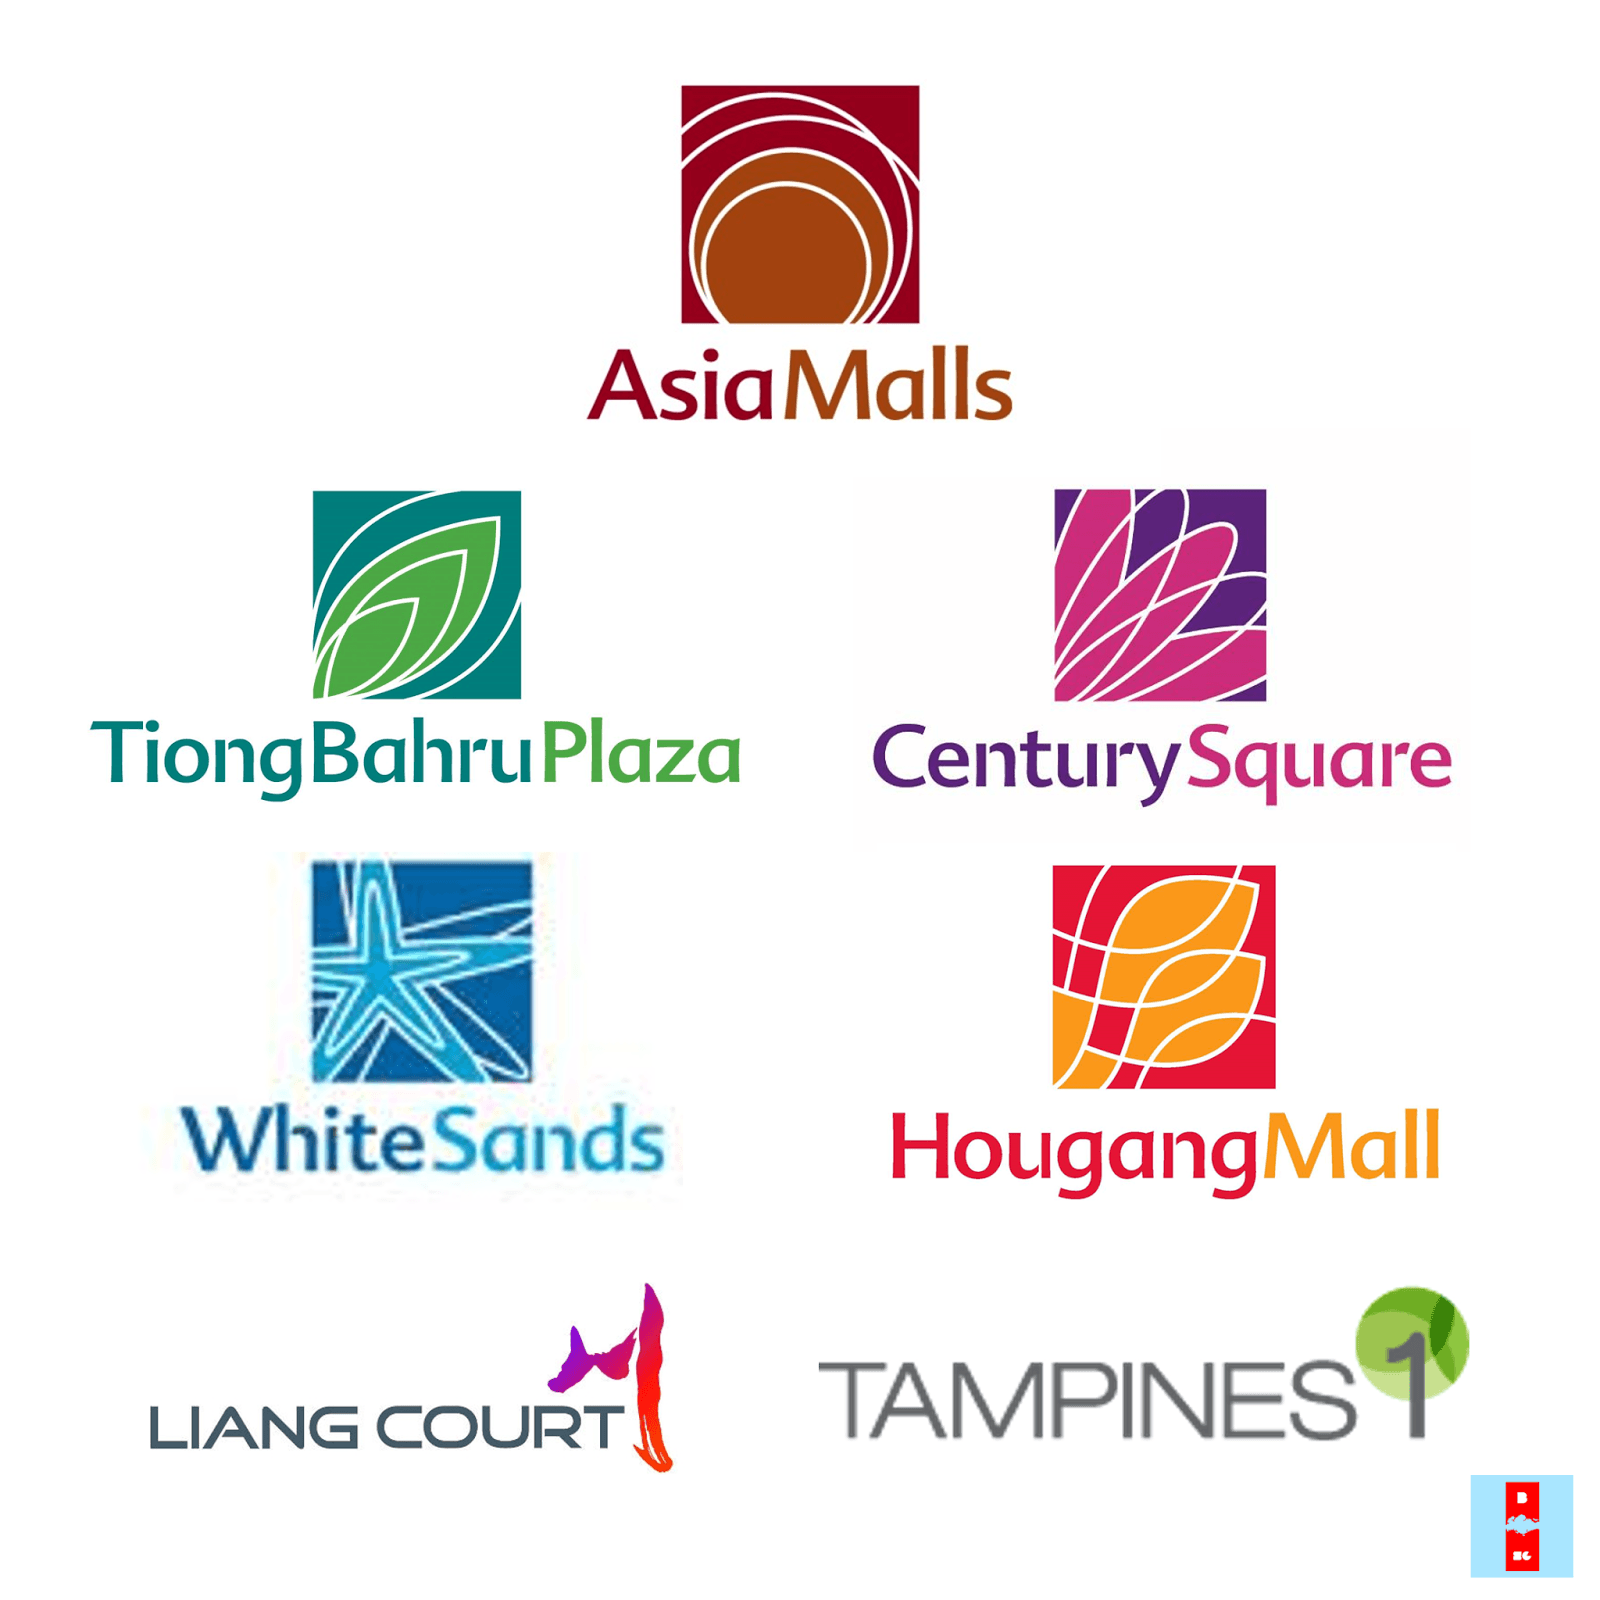 Century Square Logo - Tiong Bahru Plaza: Every day is a throwback - Branding Singapore